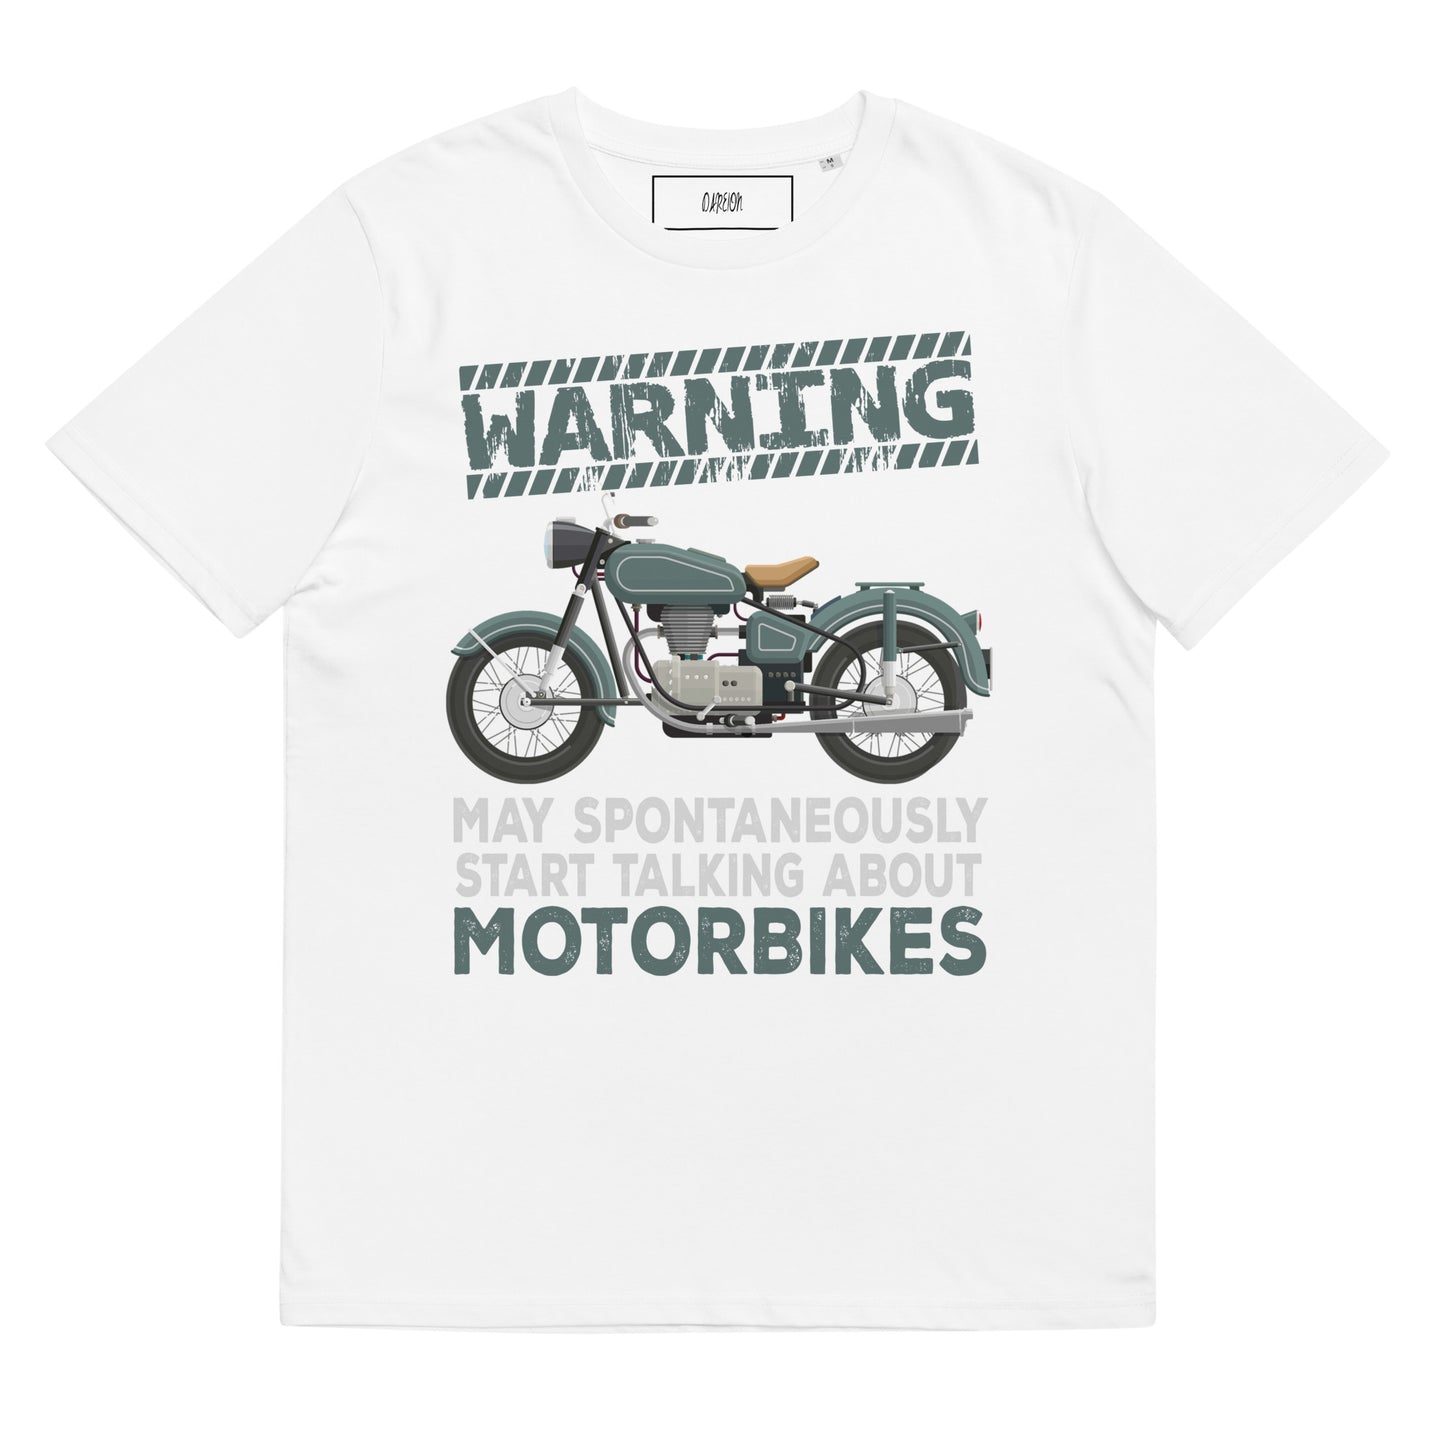 Motorcycle Lover's Organic Cotton T-Shirt